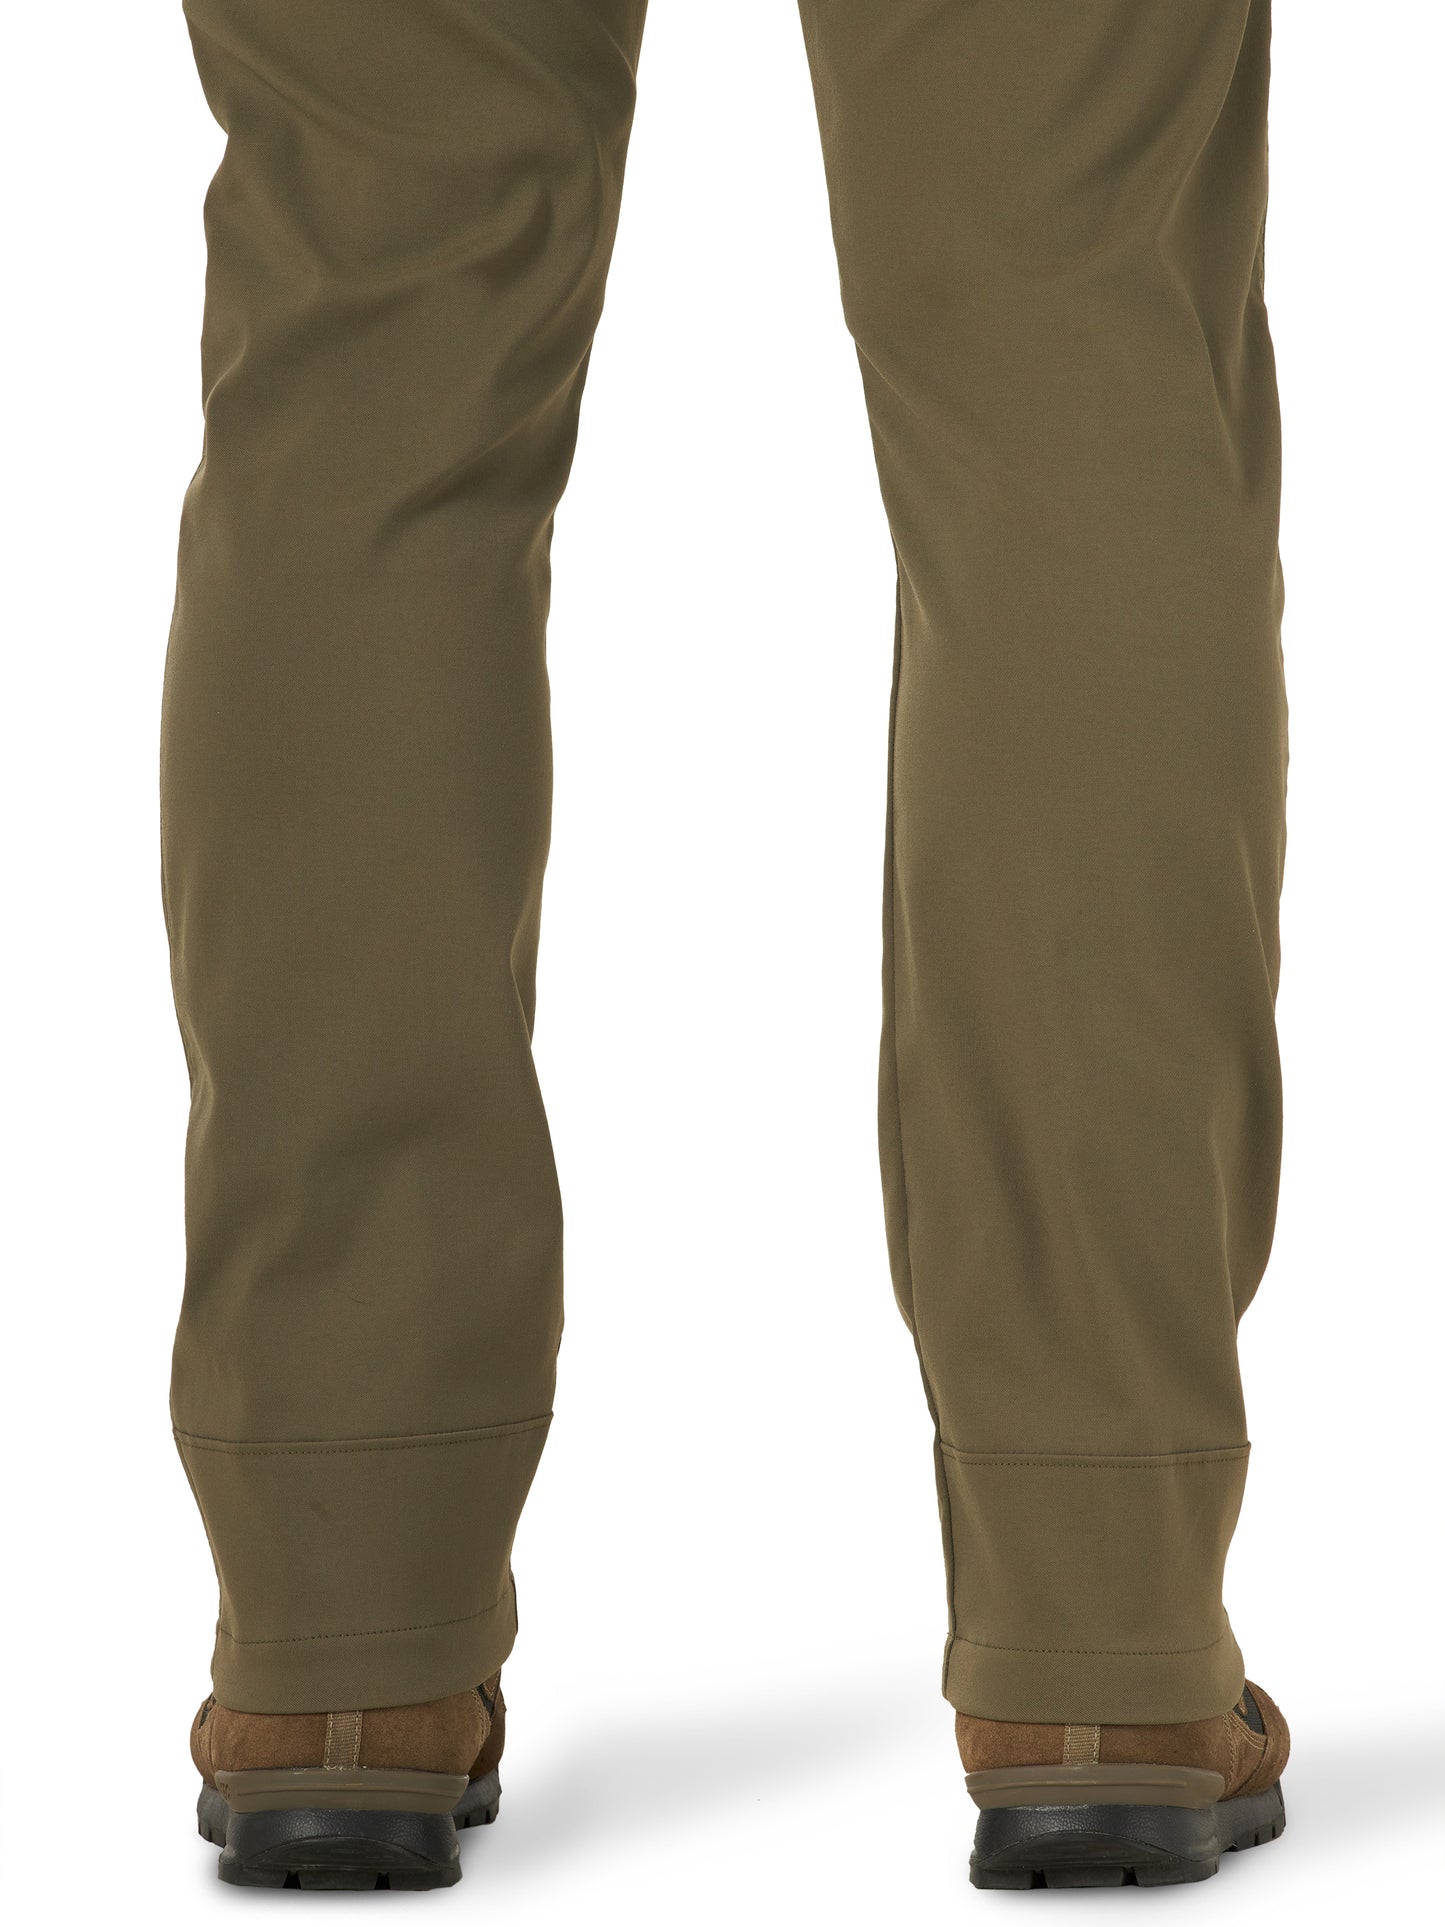 ns849st Men's All Terrain Gear Synthetic Utility Pant by Wrangler